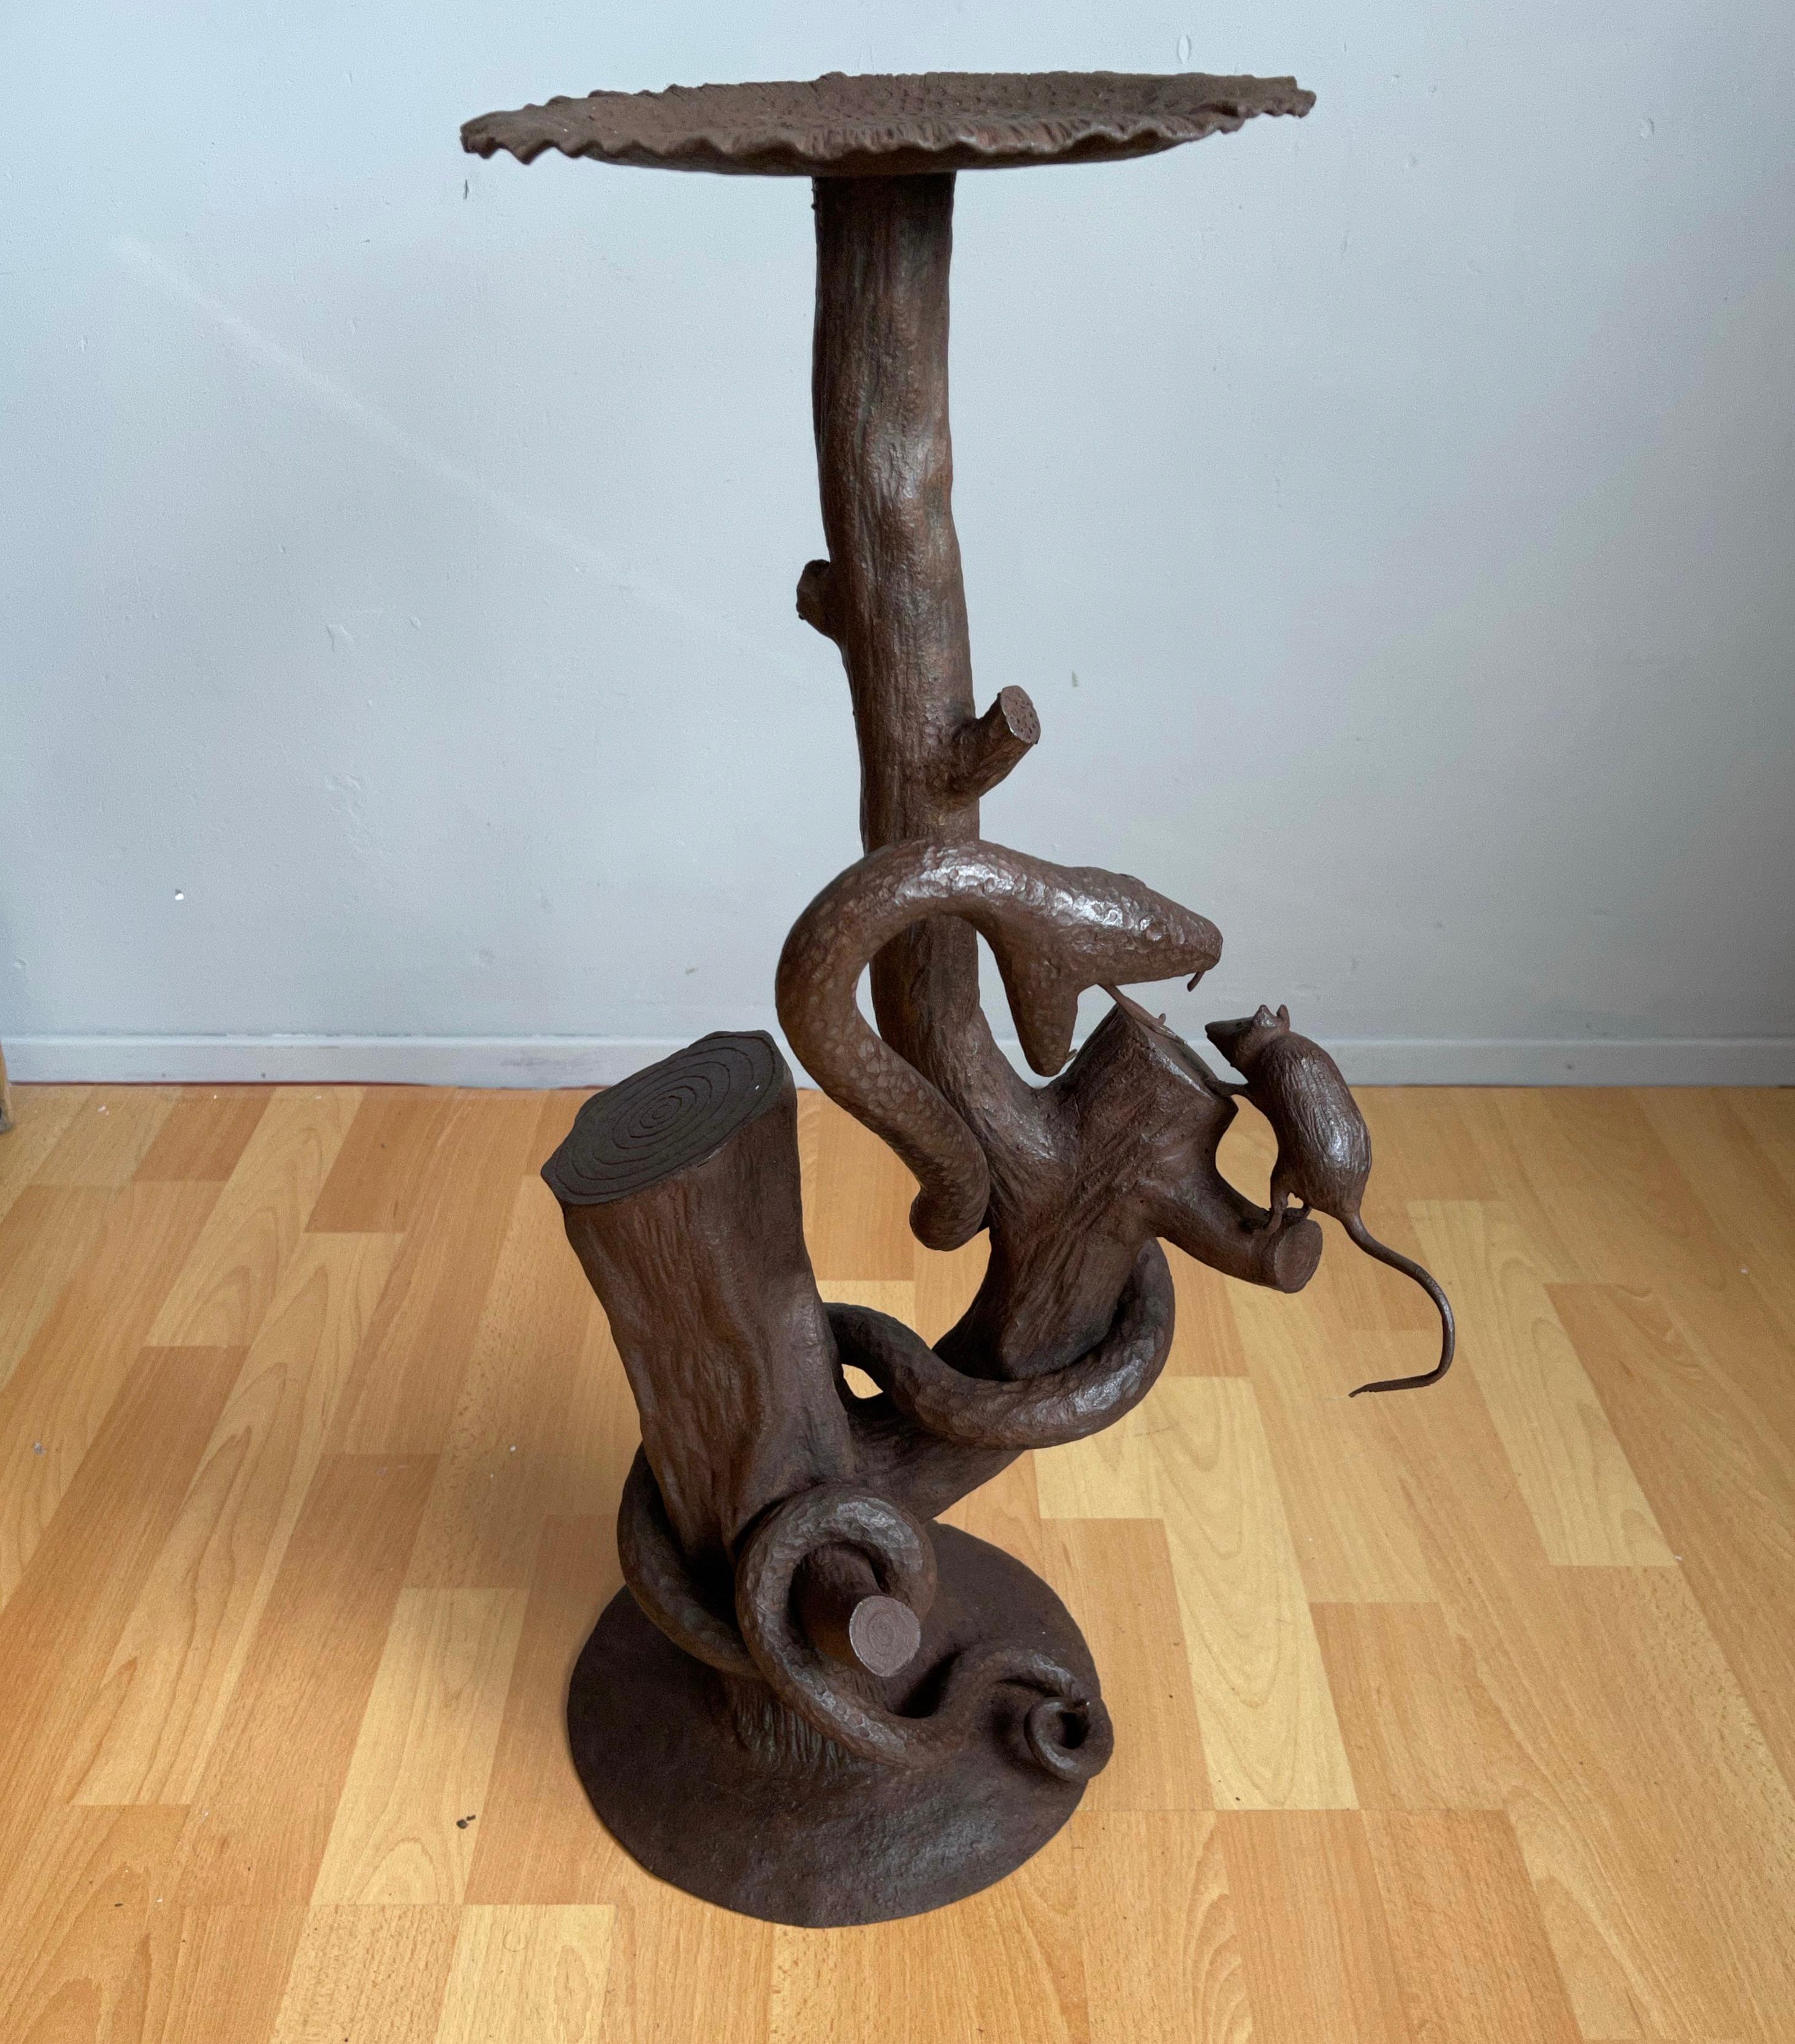 Hand forged, antique work-of-art sculpture or plant stand.

If you are a collector of unique and stylish antiques then this hand-forged wrought iron stand could be perfect for you. In our view the artist has perfectly captured a moment in the animal